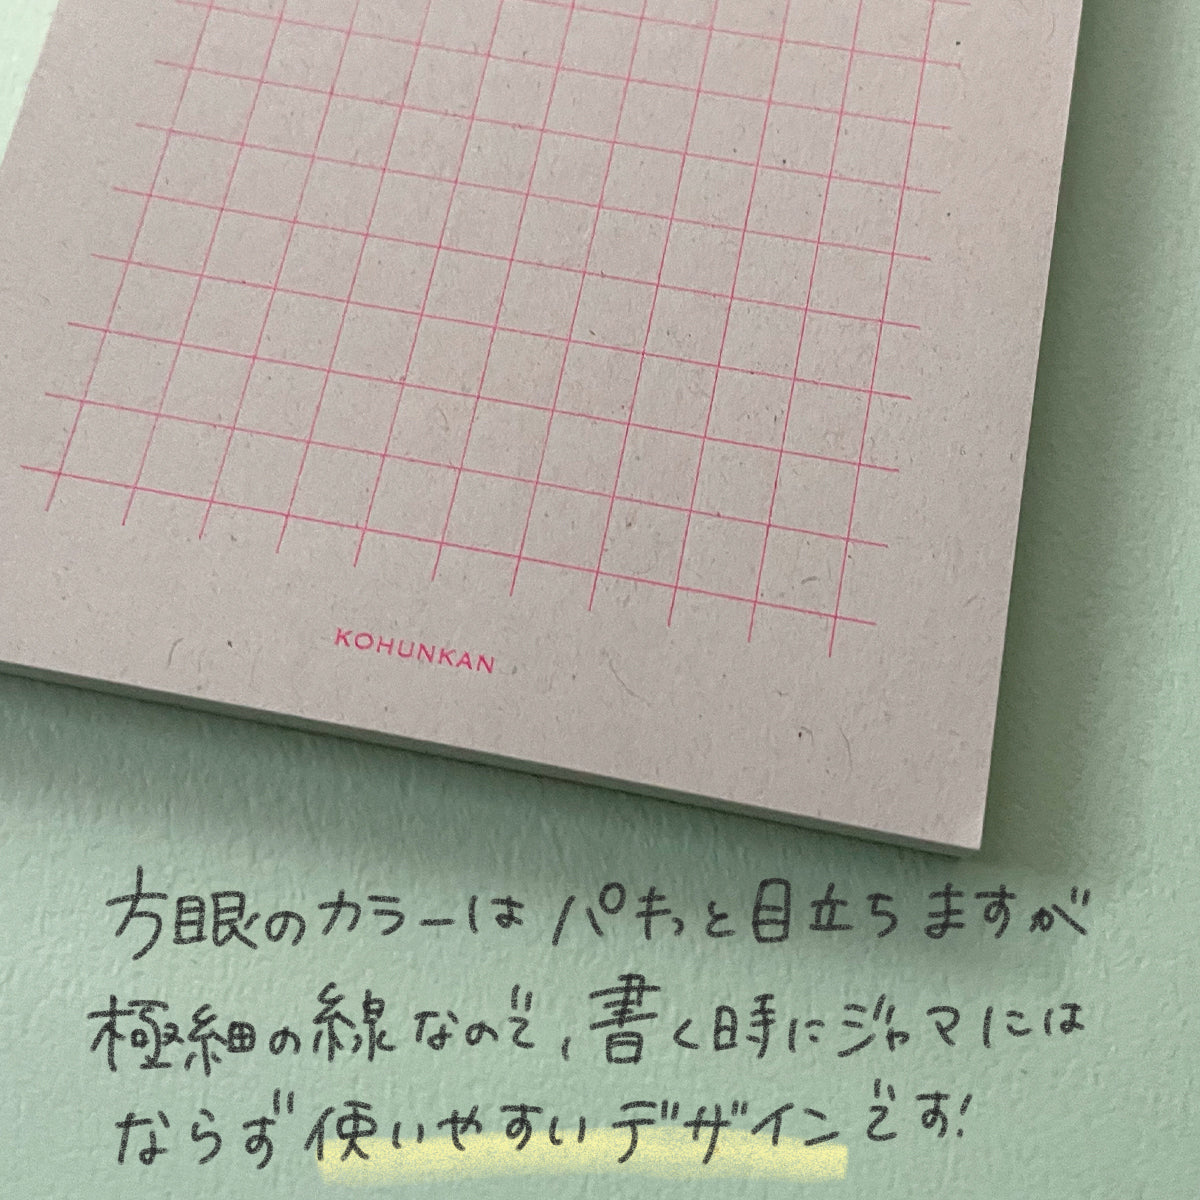 Straw paper note (memo pad)